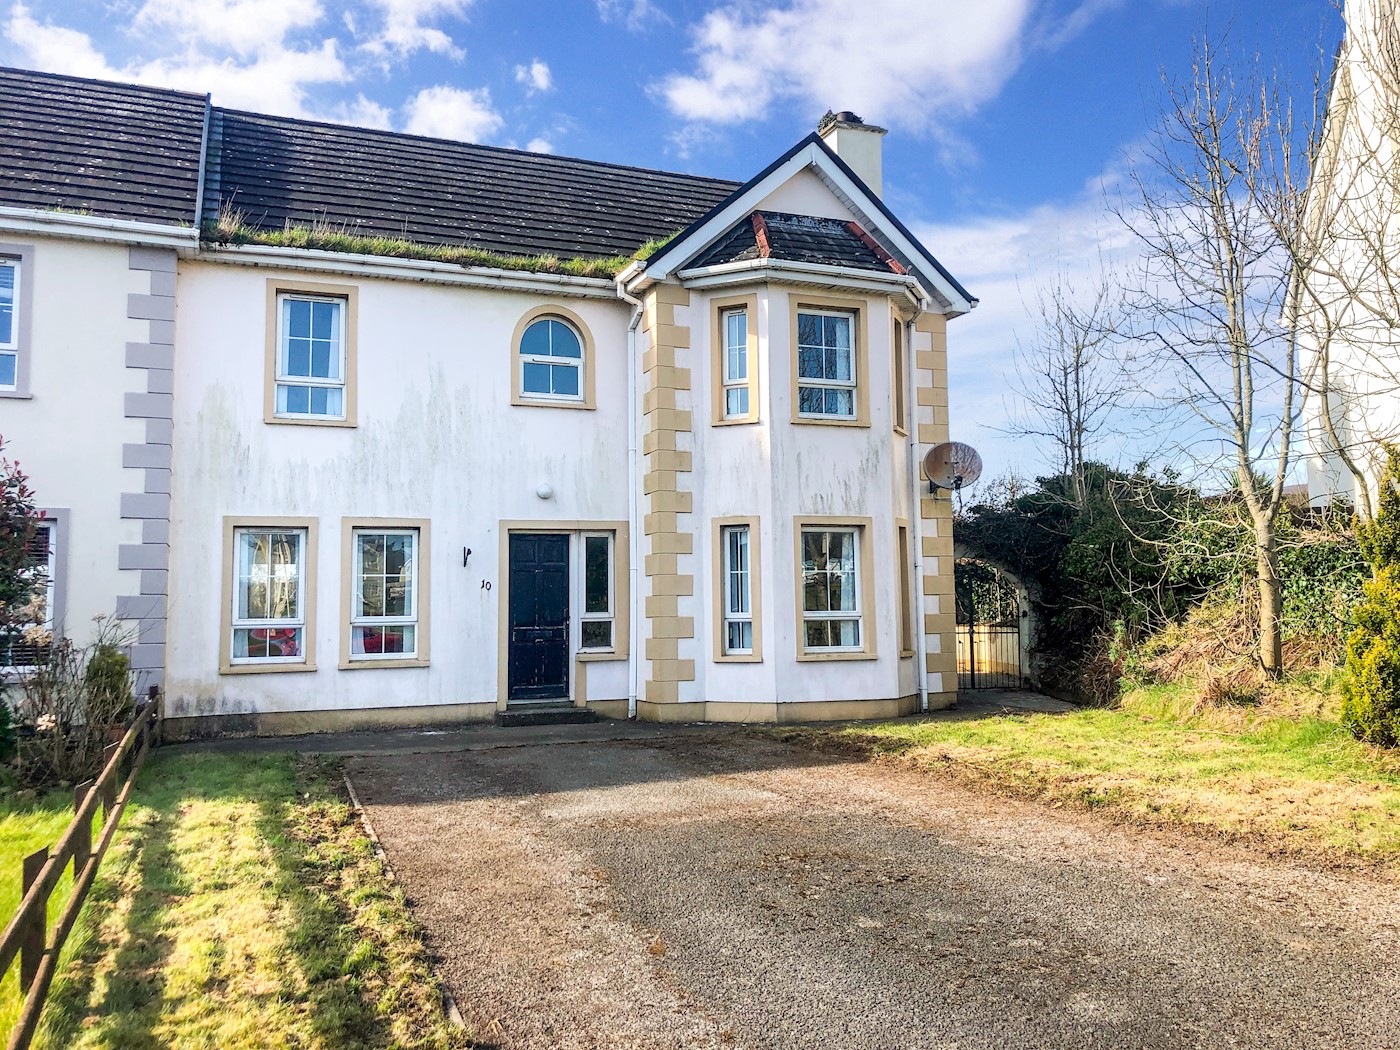 10 Aileach Valley, Burnfoot, Co. Donegal, F93 VW74 1/14